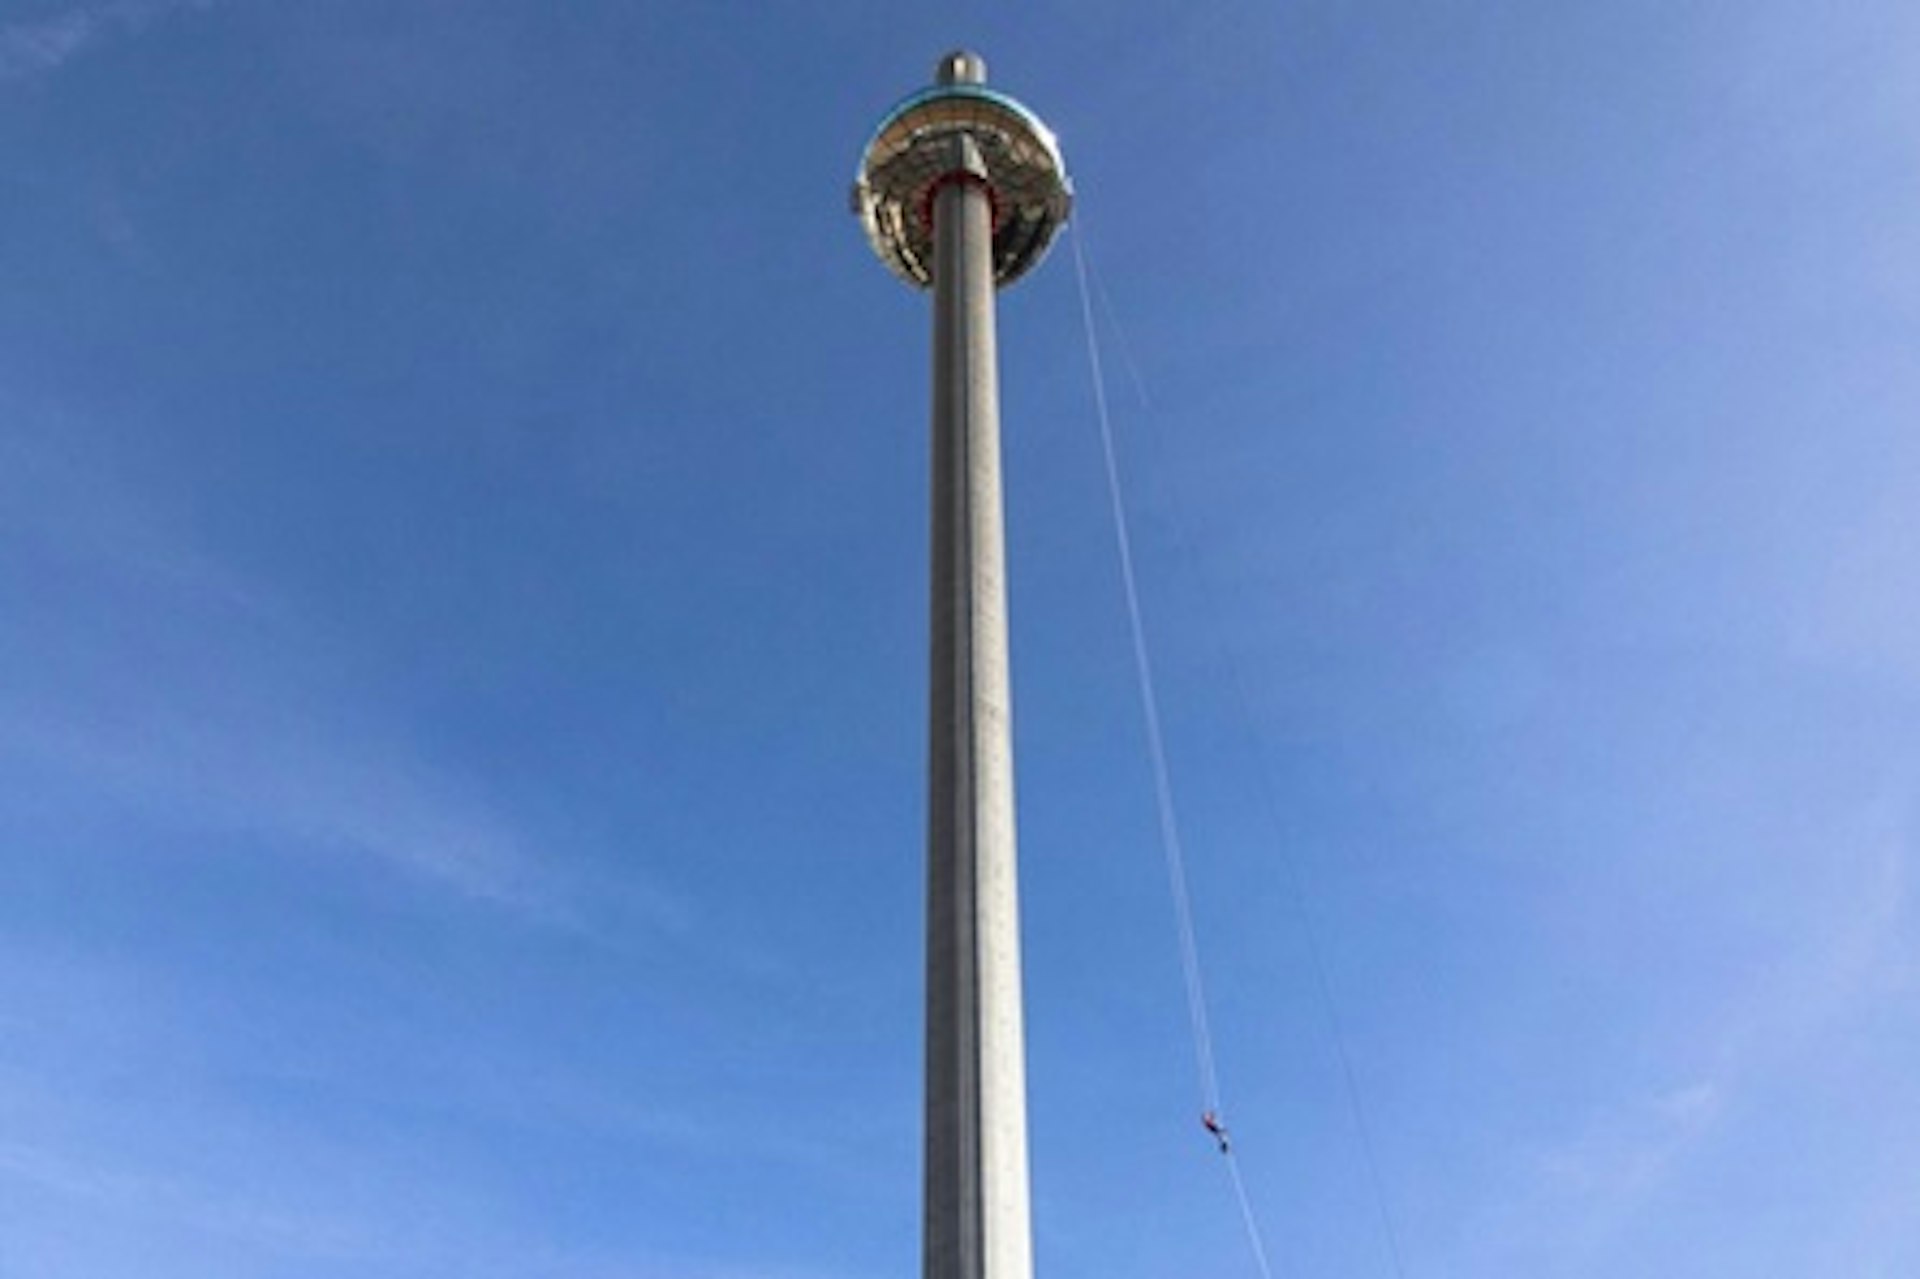 iDrop Abseil Experience at the British Airways i360 3